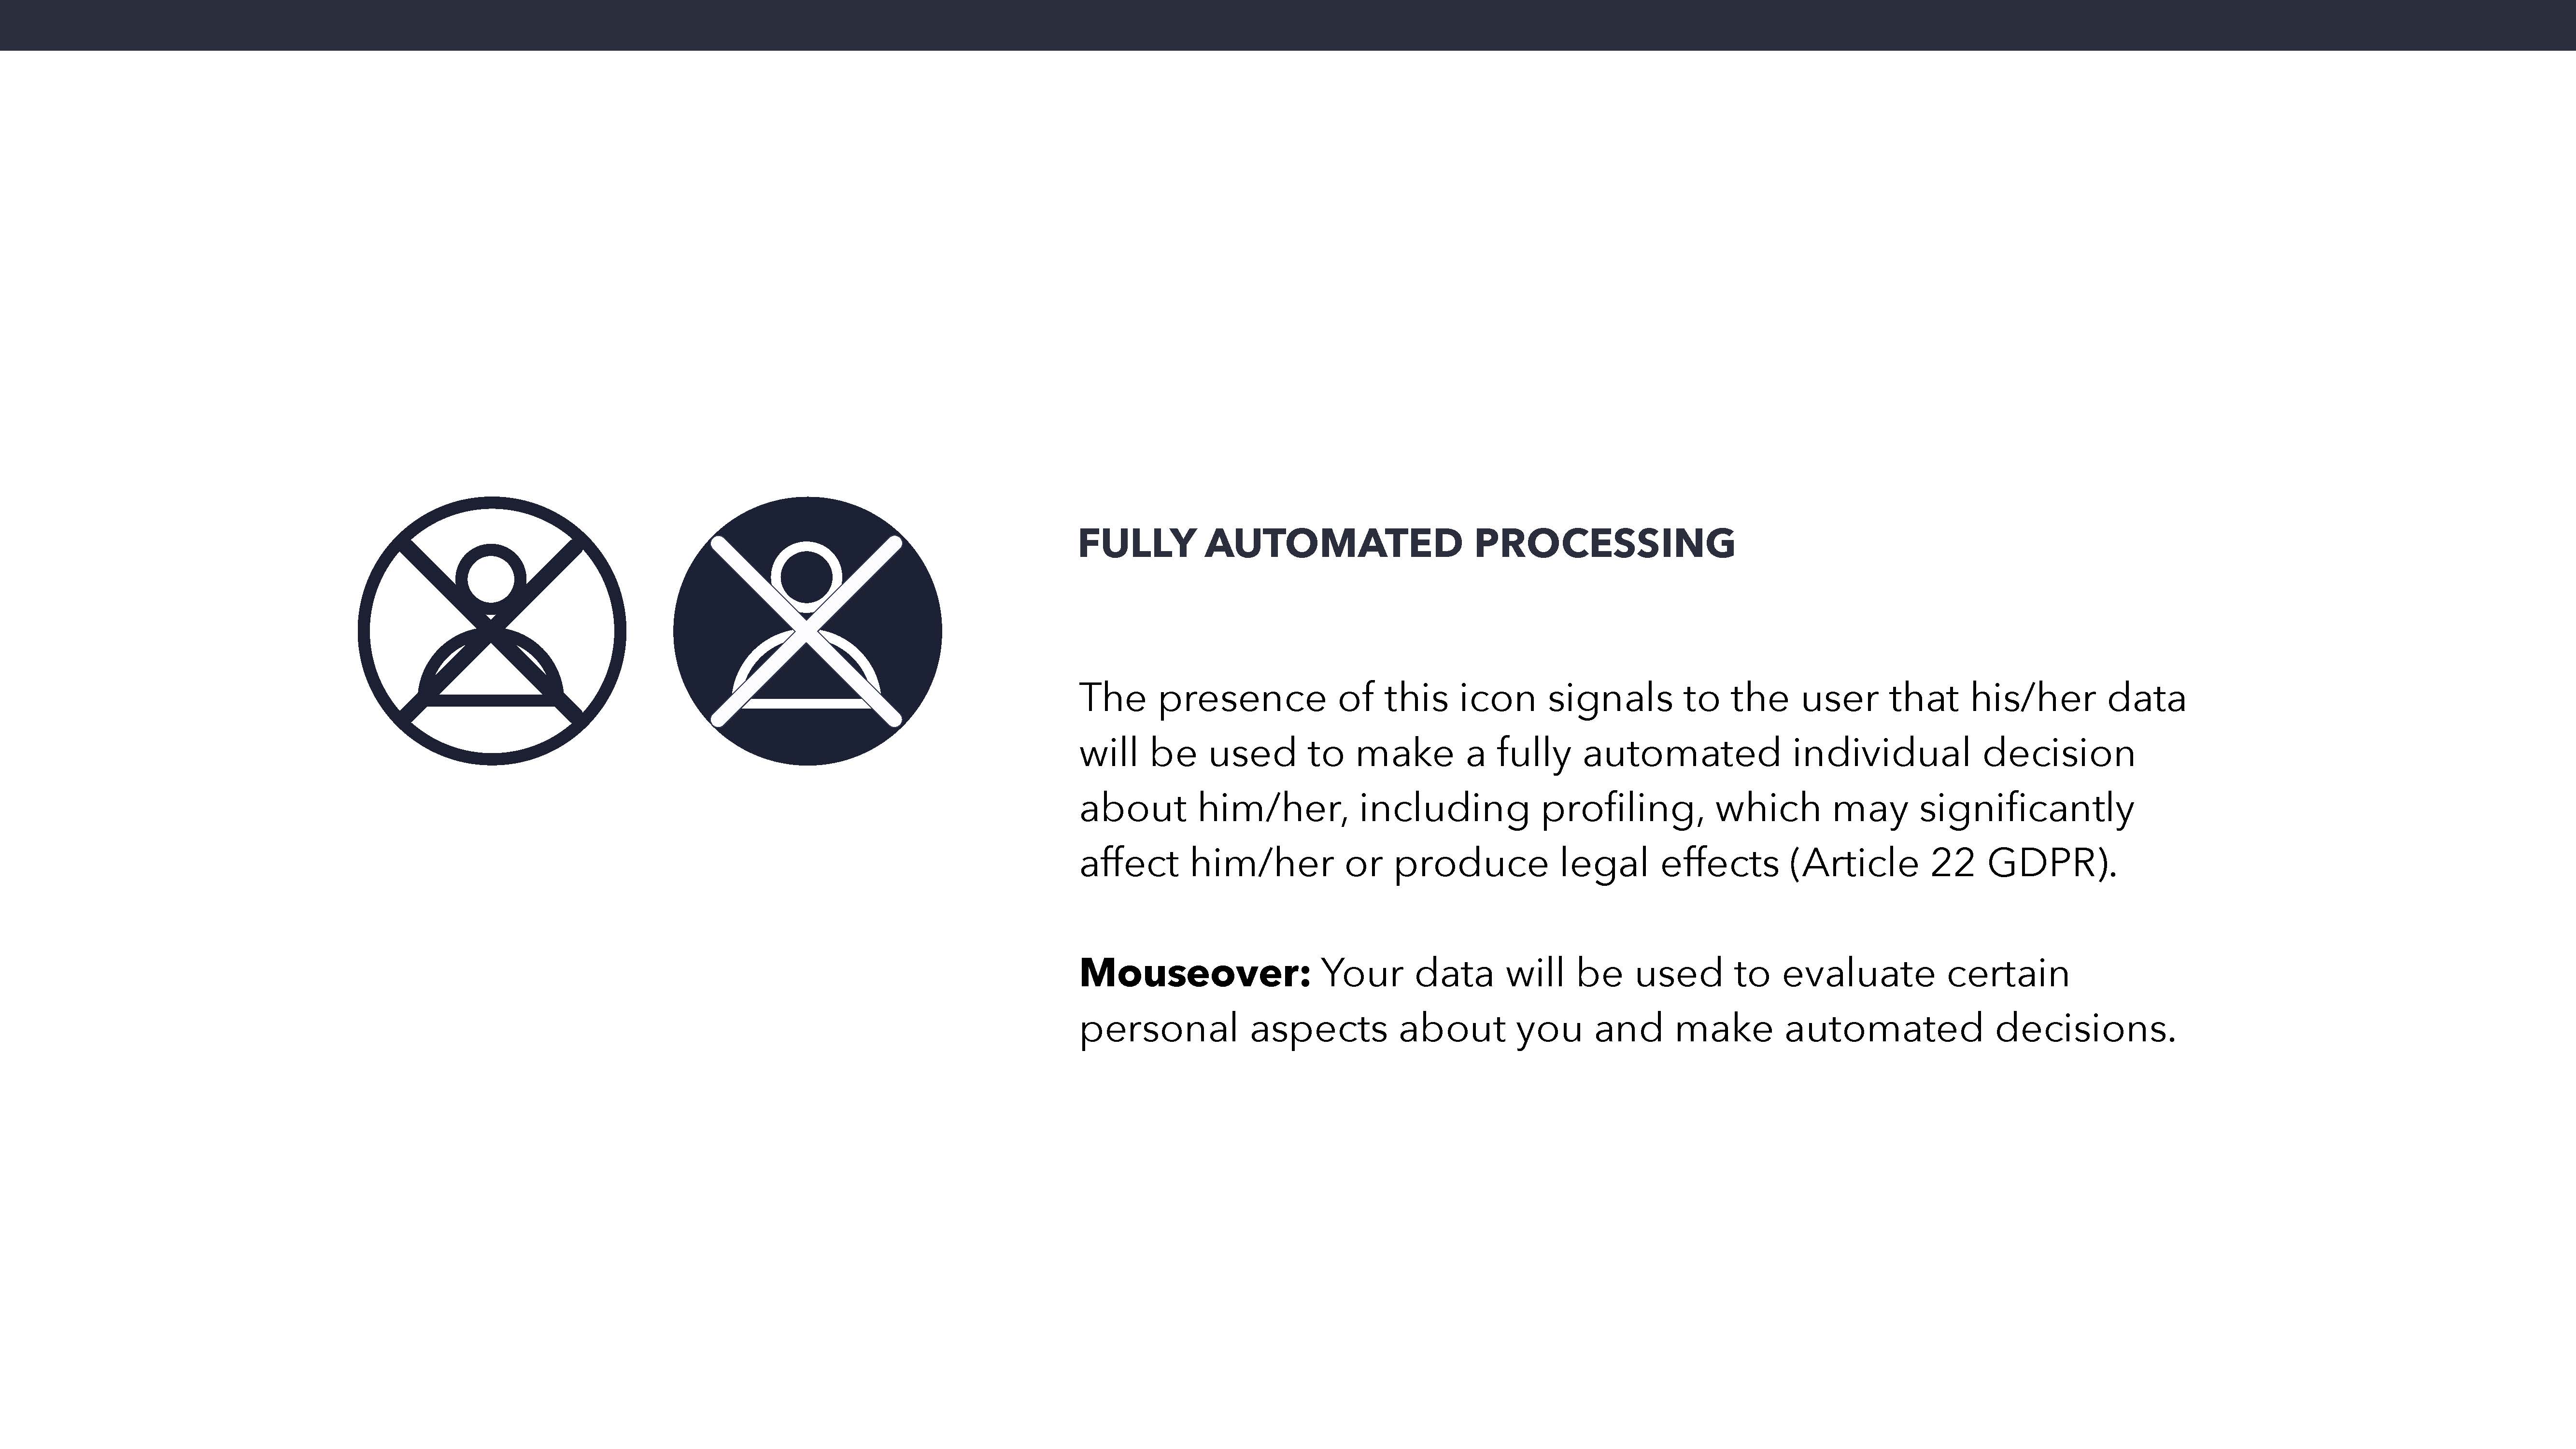 II.	Fully automated processing (Art. 22 GDPR) Icon: Signaling the presence of fully automated processing to users